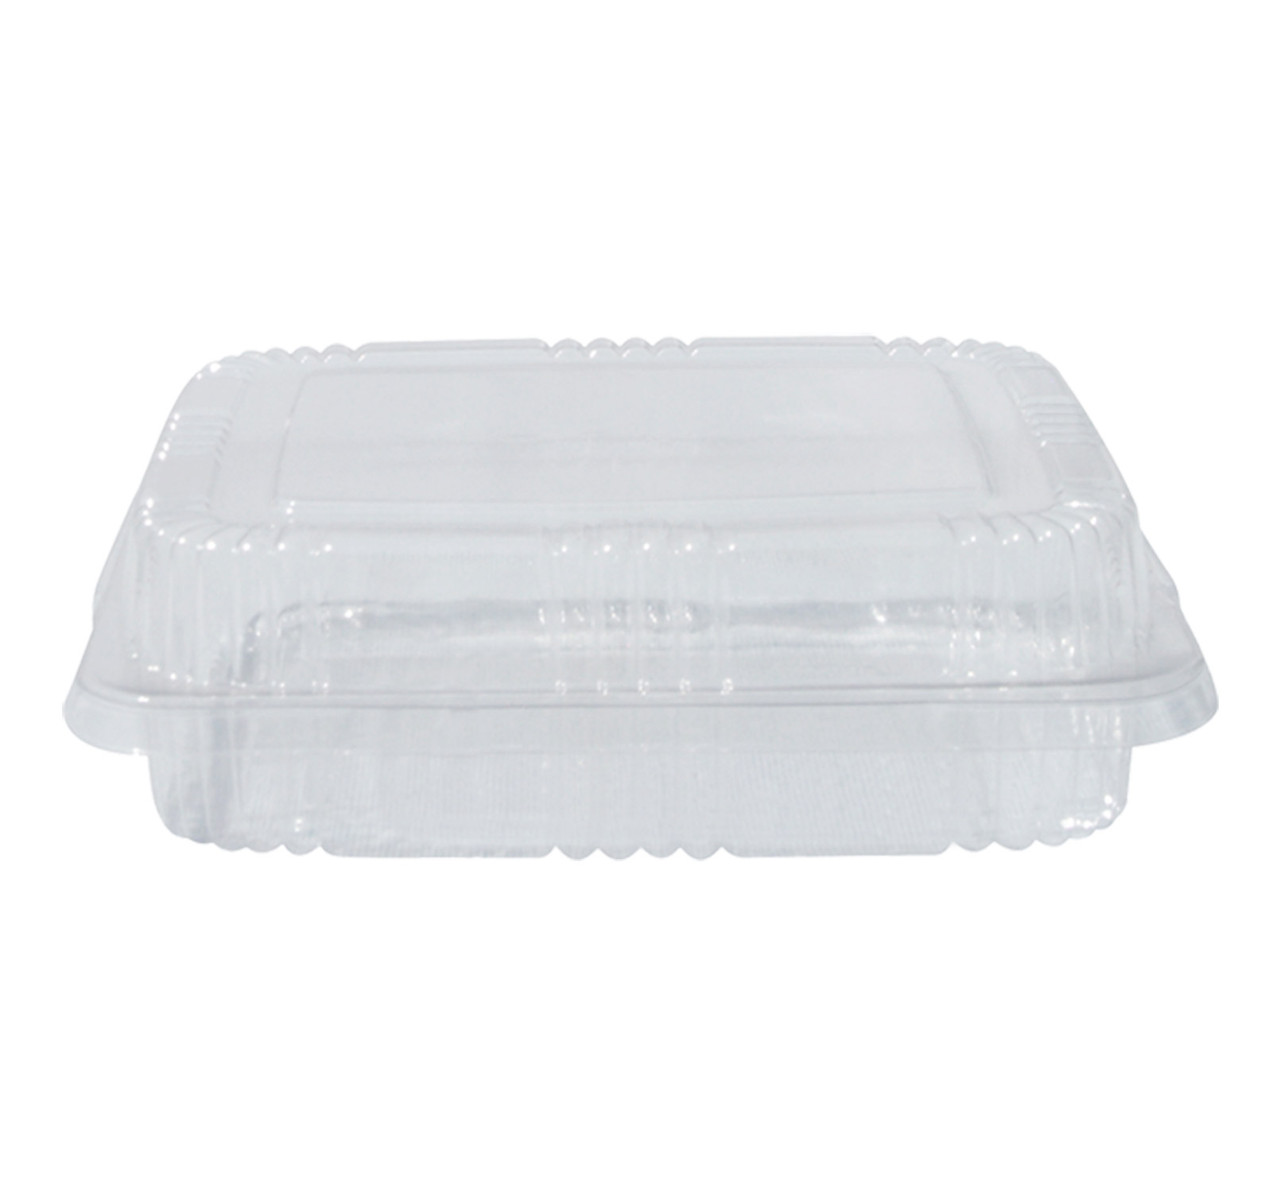 Prep & Savour 6x6 Seal Hinged-Lid Clear Plastic Containers Take